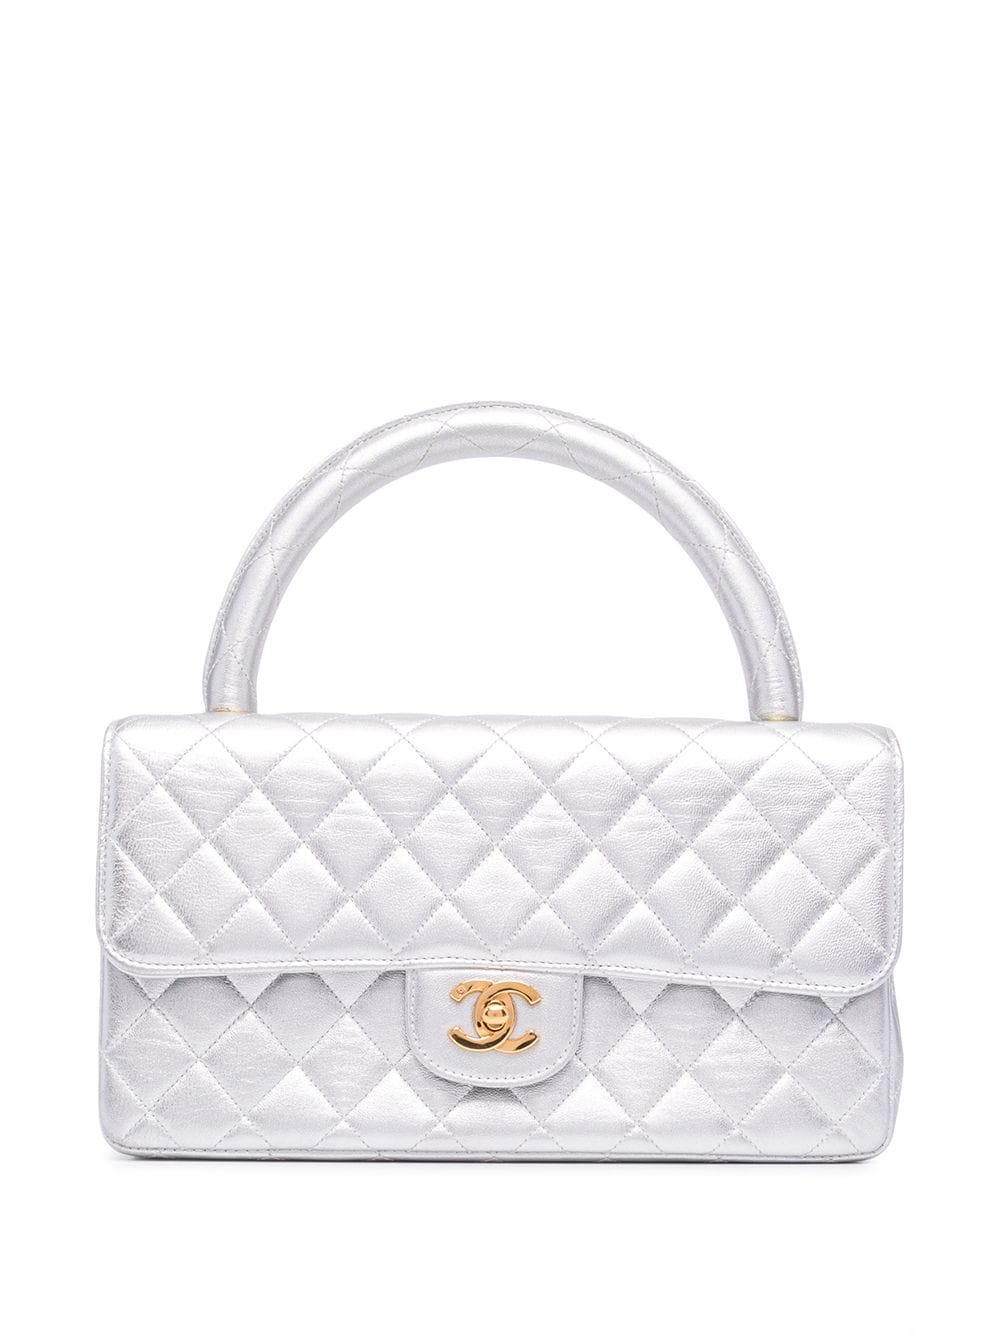 CHANEL Pre-Owned 1992 diamond-quilted rectangle-shaped handbag - Silver von CHANEL Pre-Owned